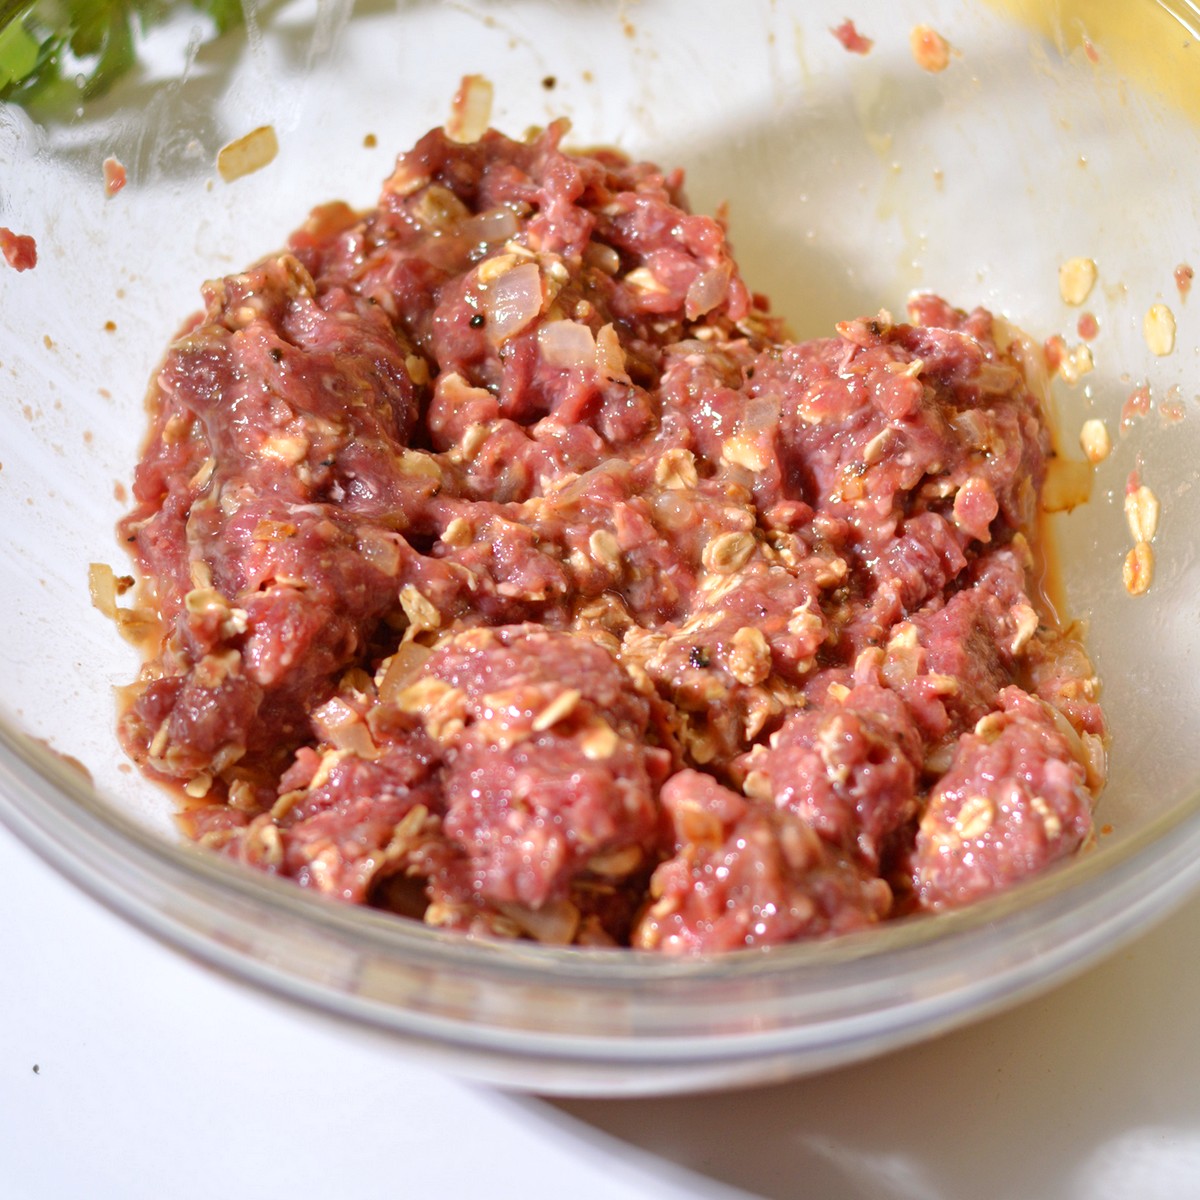 Step three of the meatloaf mixture in a bowl.